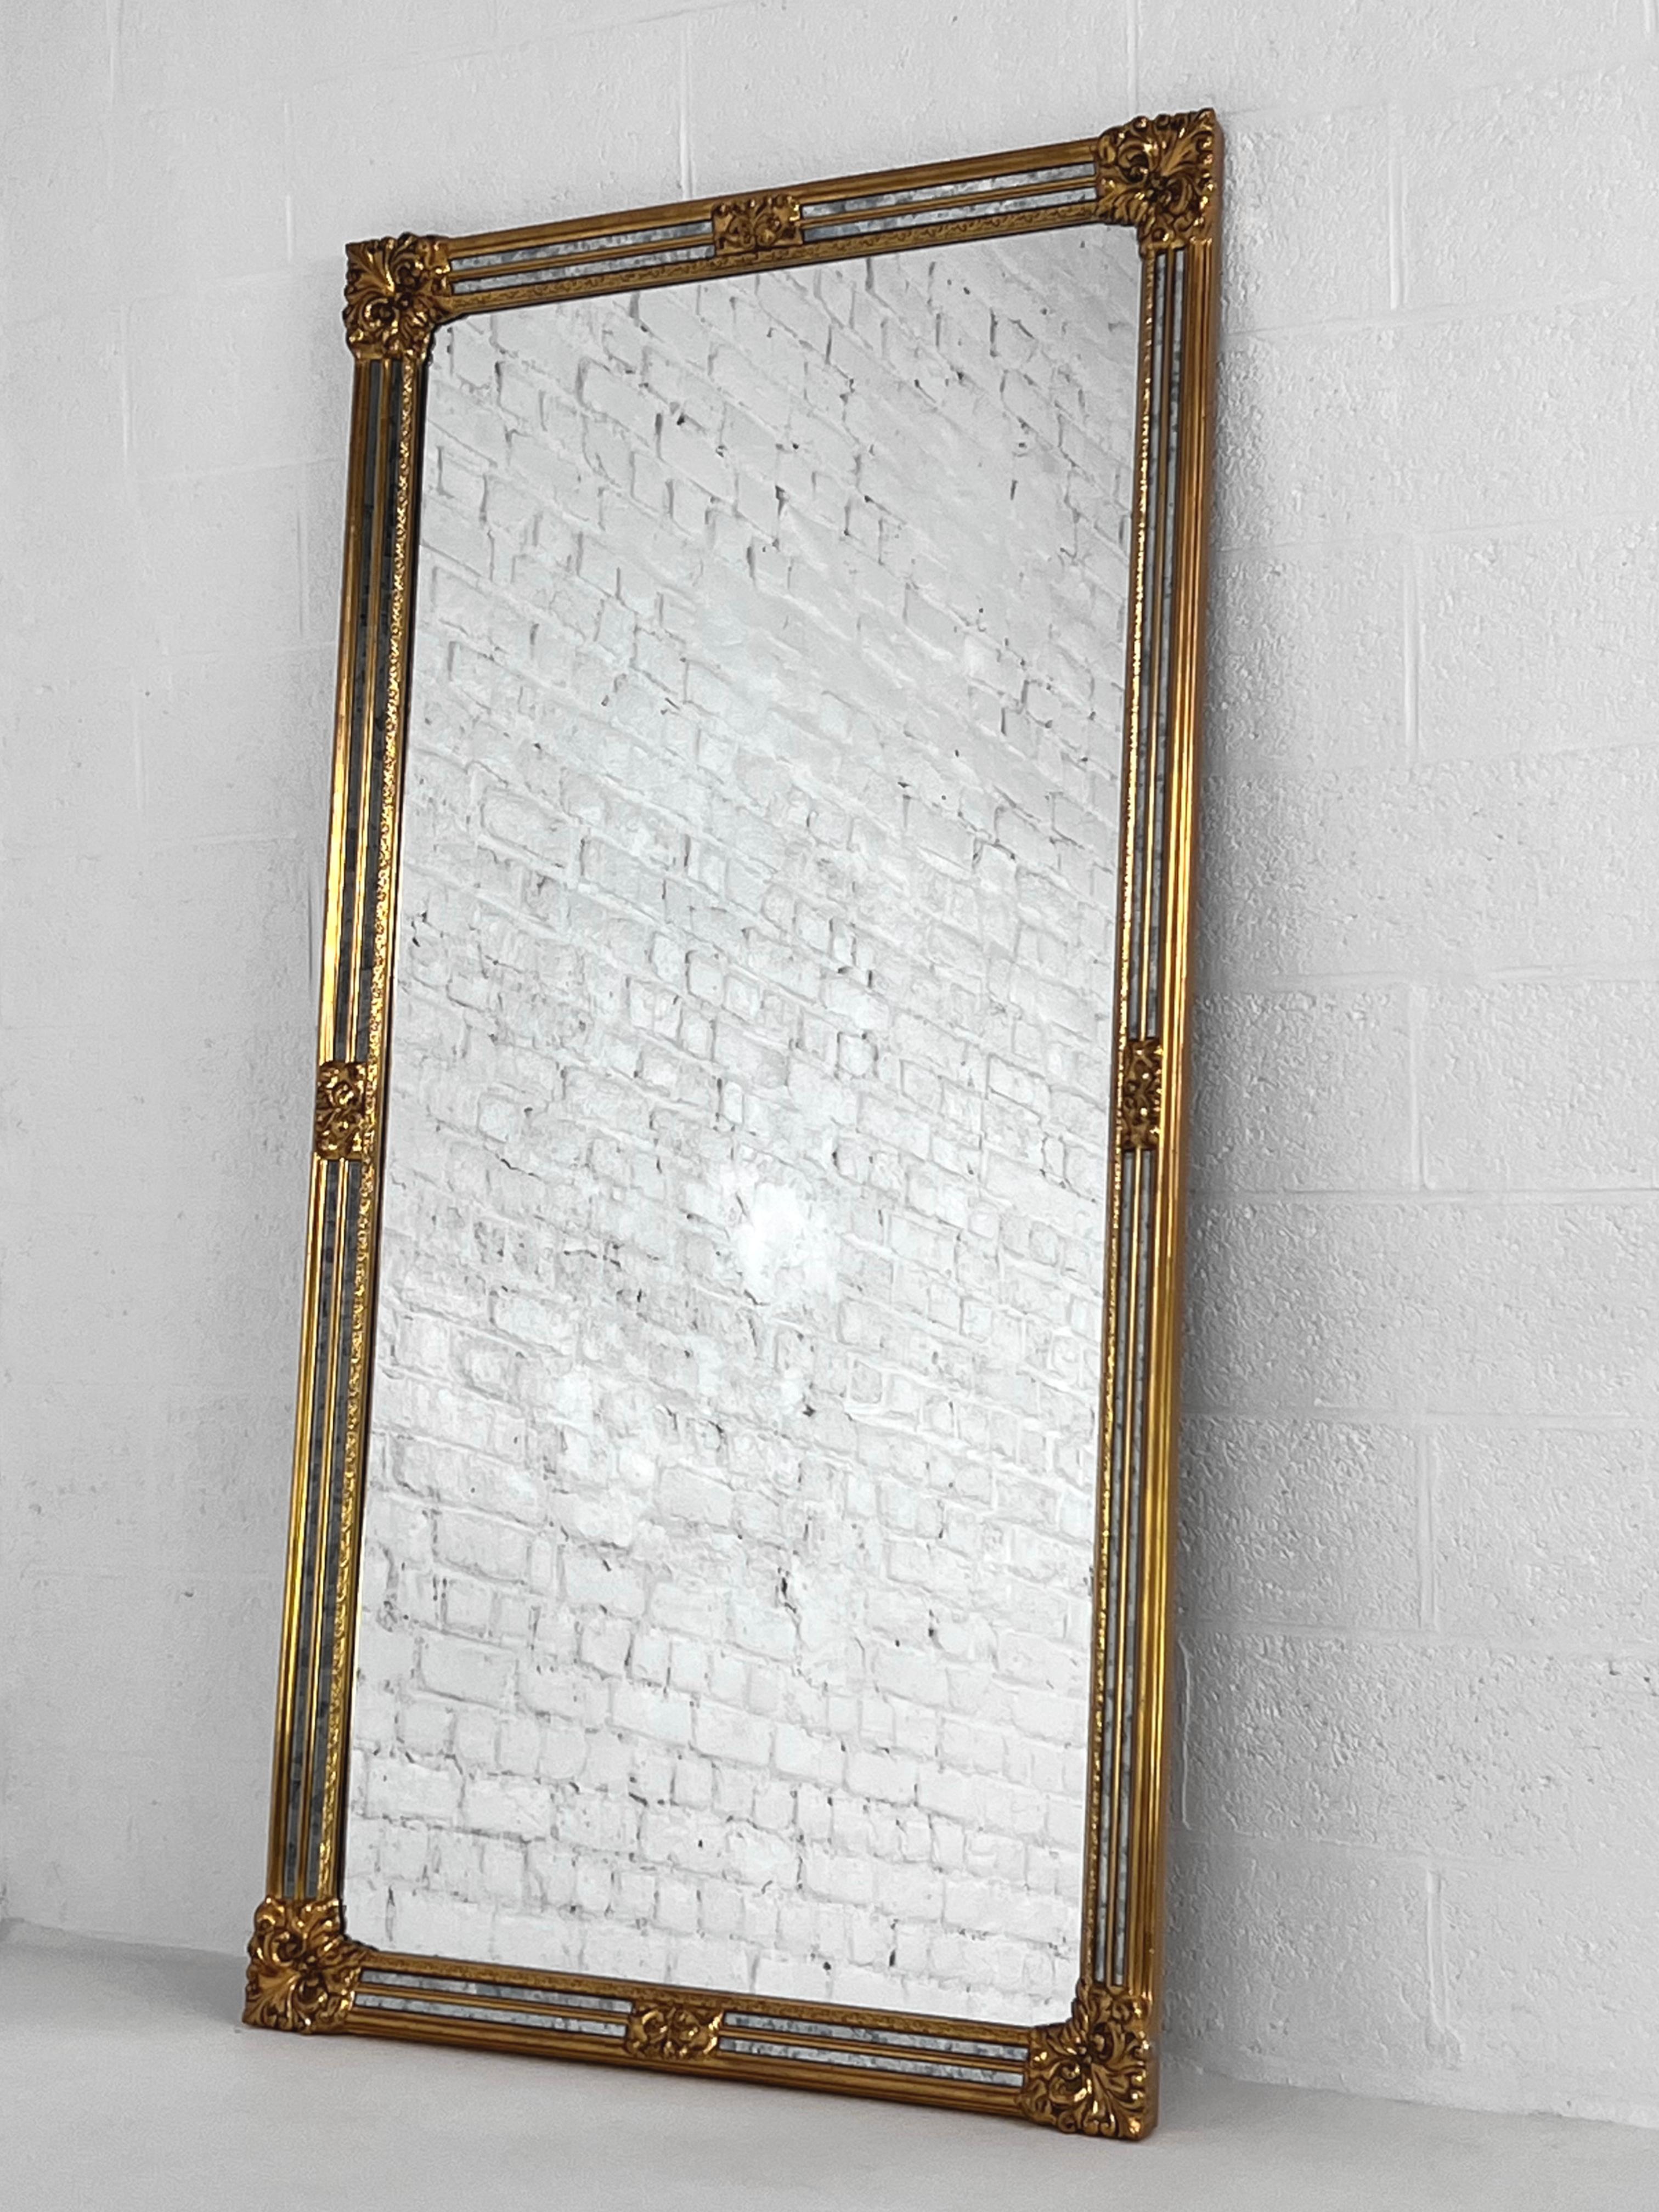 Large mirror with high-quality craftmanship. It imposes by its size but also by the quality of its manufacture. The built-in fasteners are designed so you can hang it in portrait or landscape. In perfect condition.